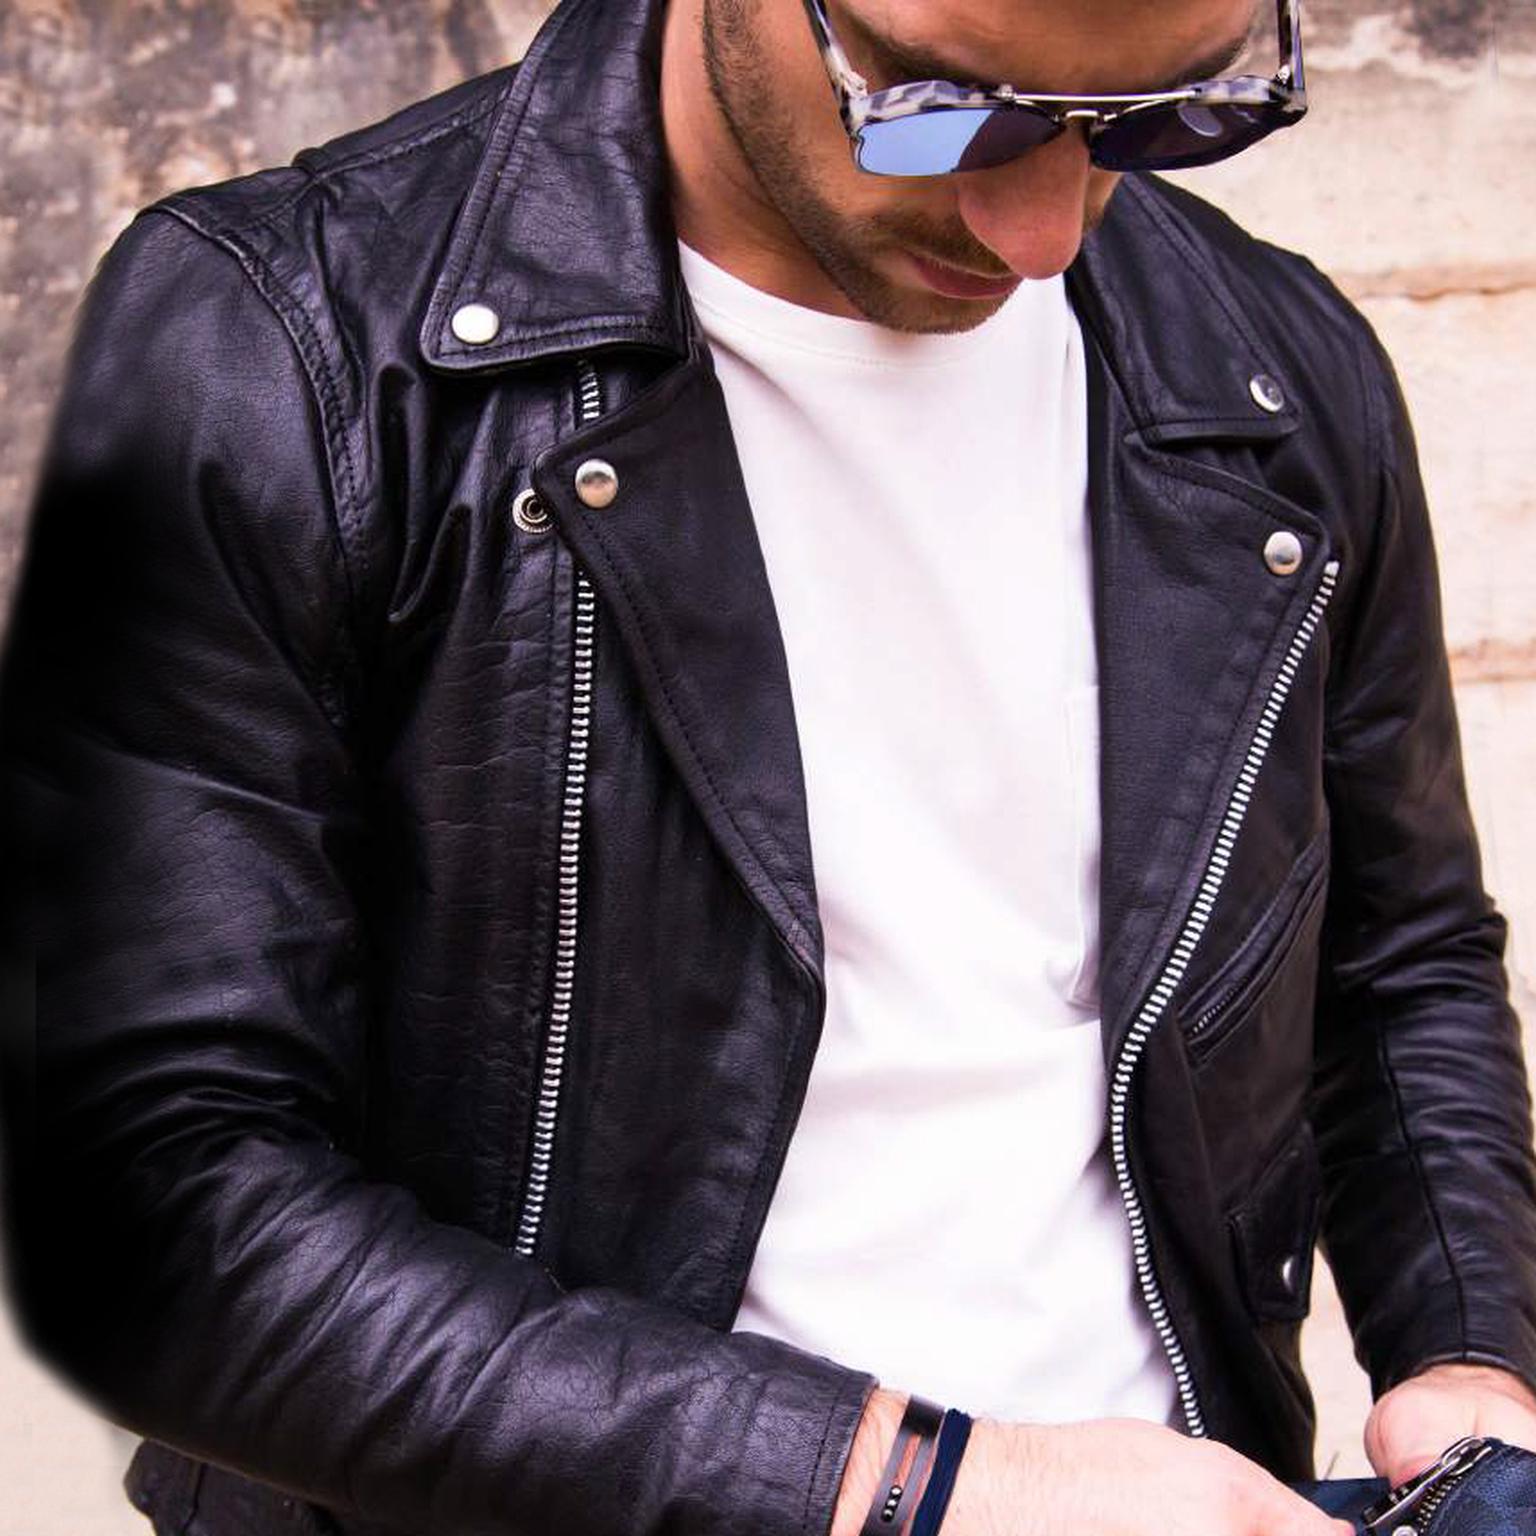 The stylish men's jewellery he'll actually want to wear